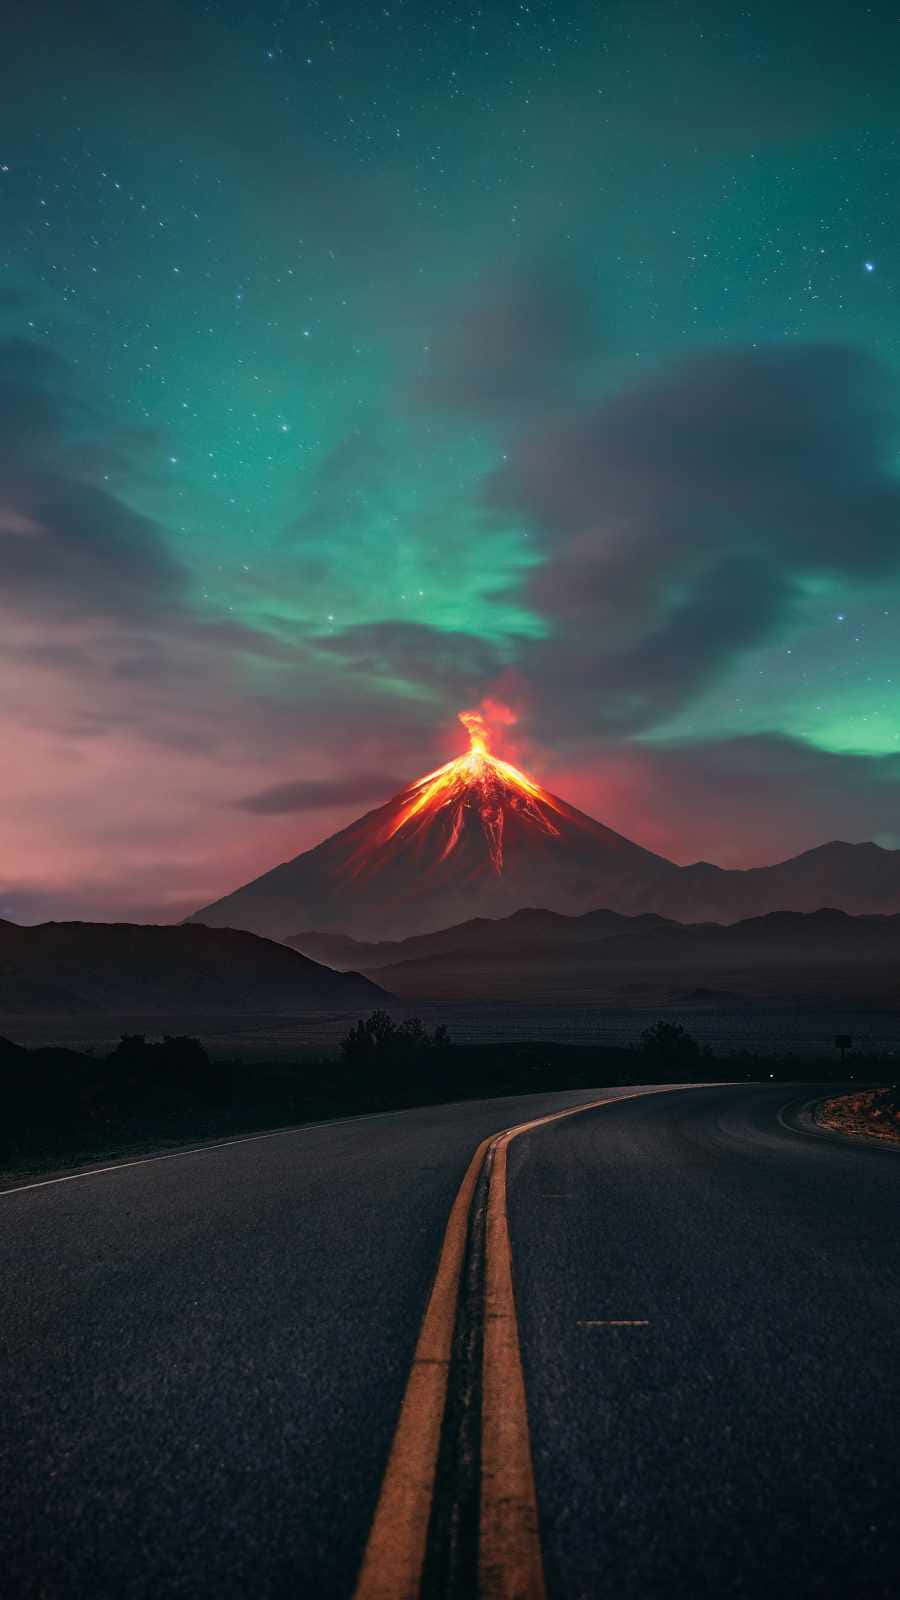 Awe-inspiring Image Of A Road Trip To An Active Volcano